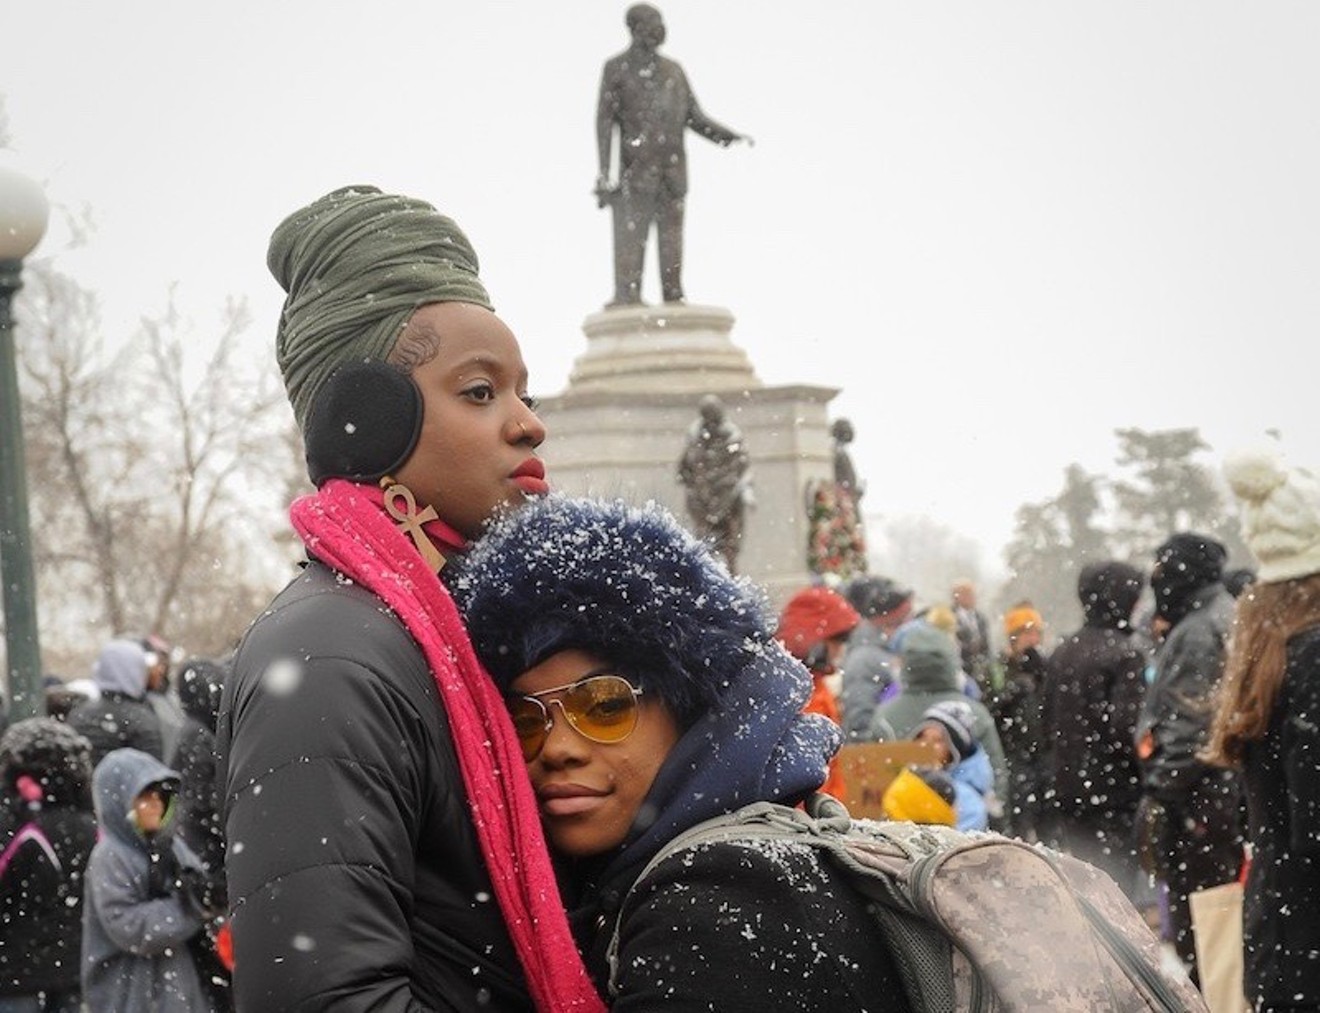 Step forward for civil rights at the annual Martin Luther King Jr. Day Marade.